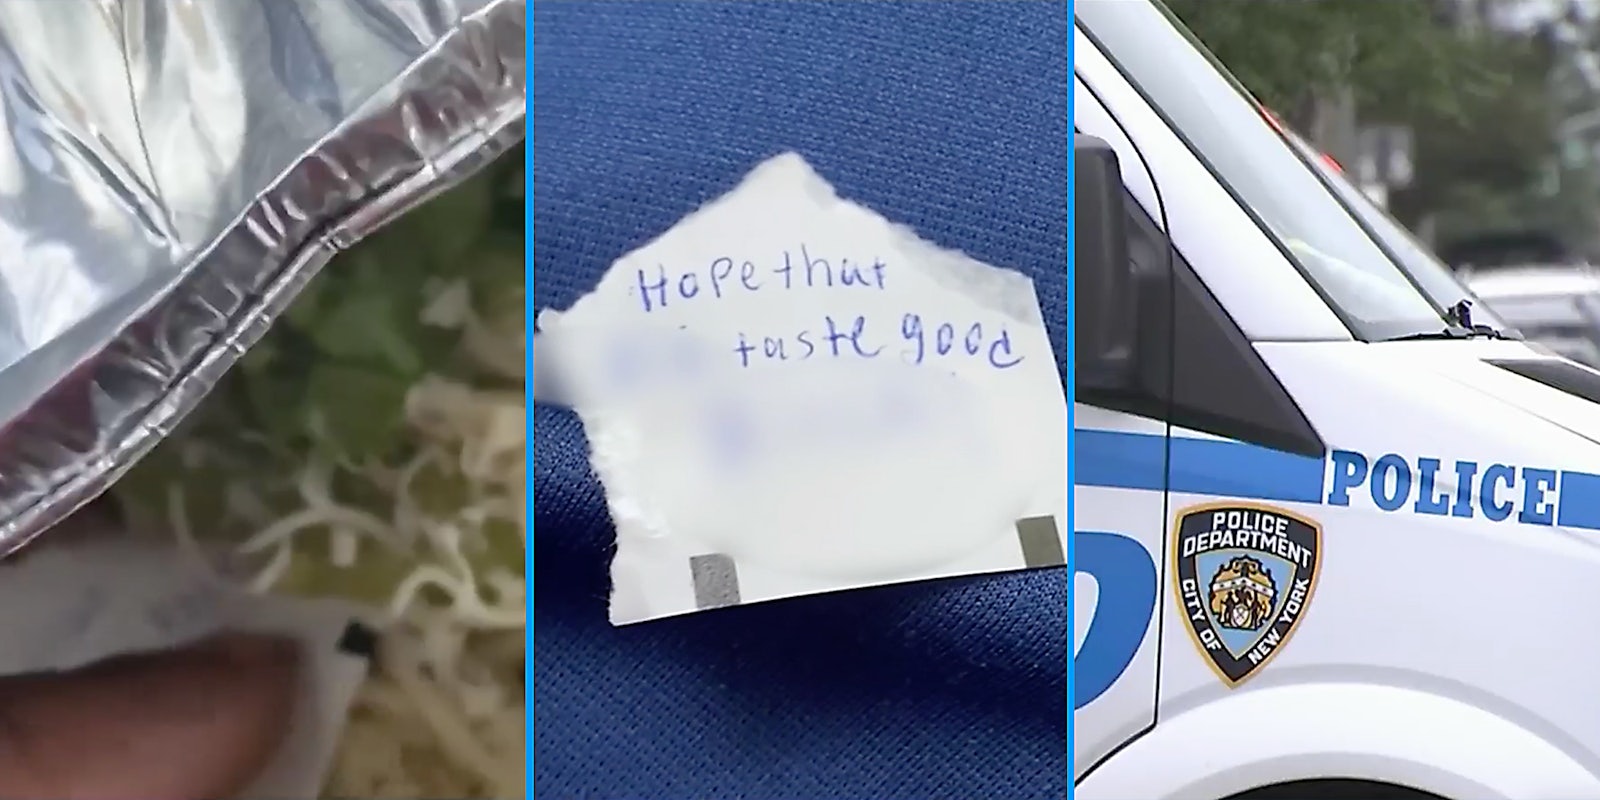 A foos container (L), a hand written note (C), and police van (R).